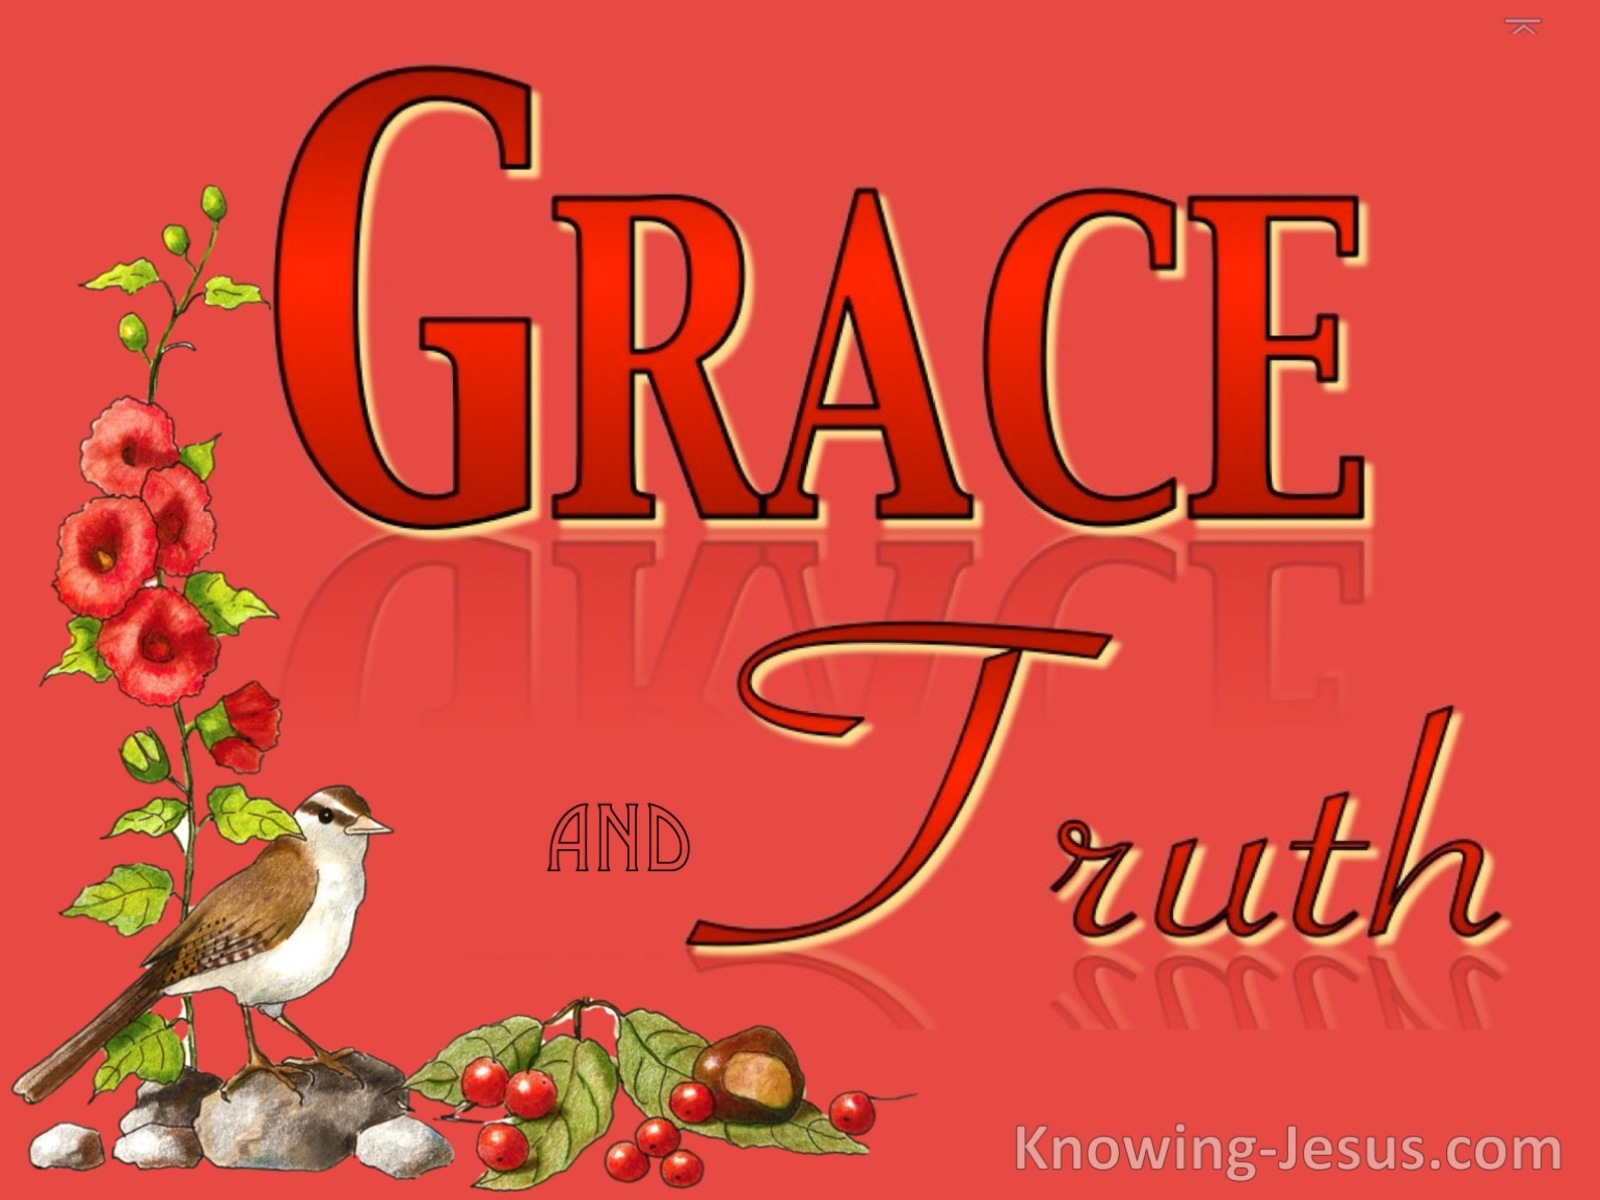 Grace and Truth (devotional)09-15 (red)